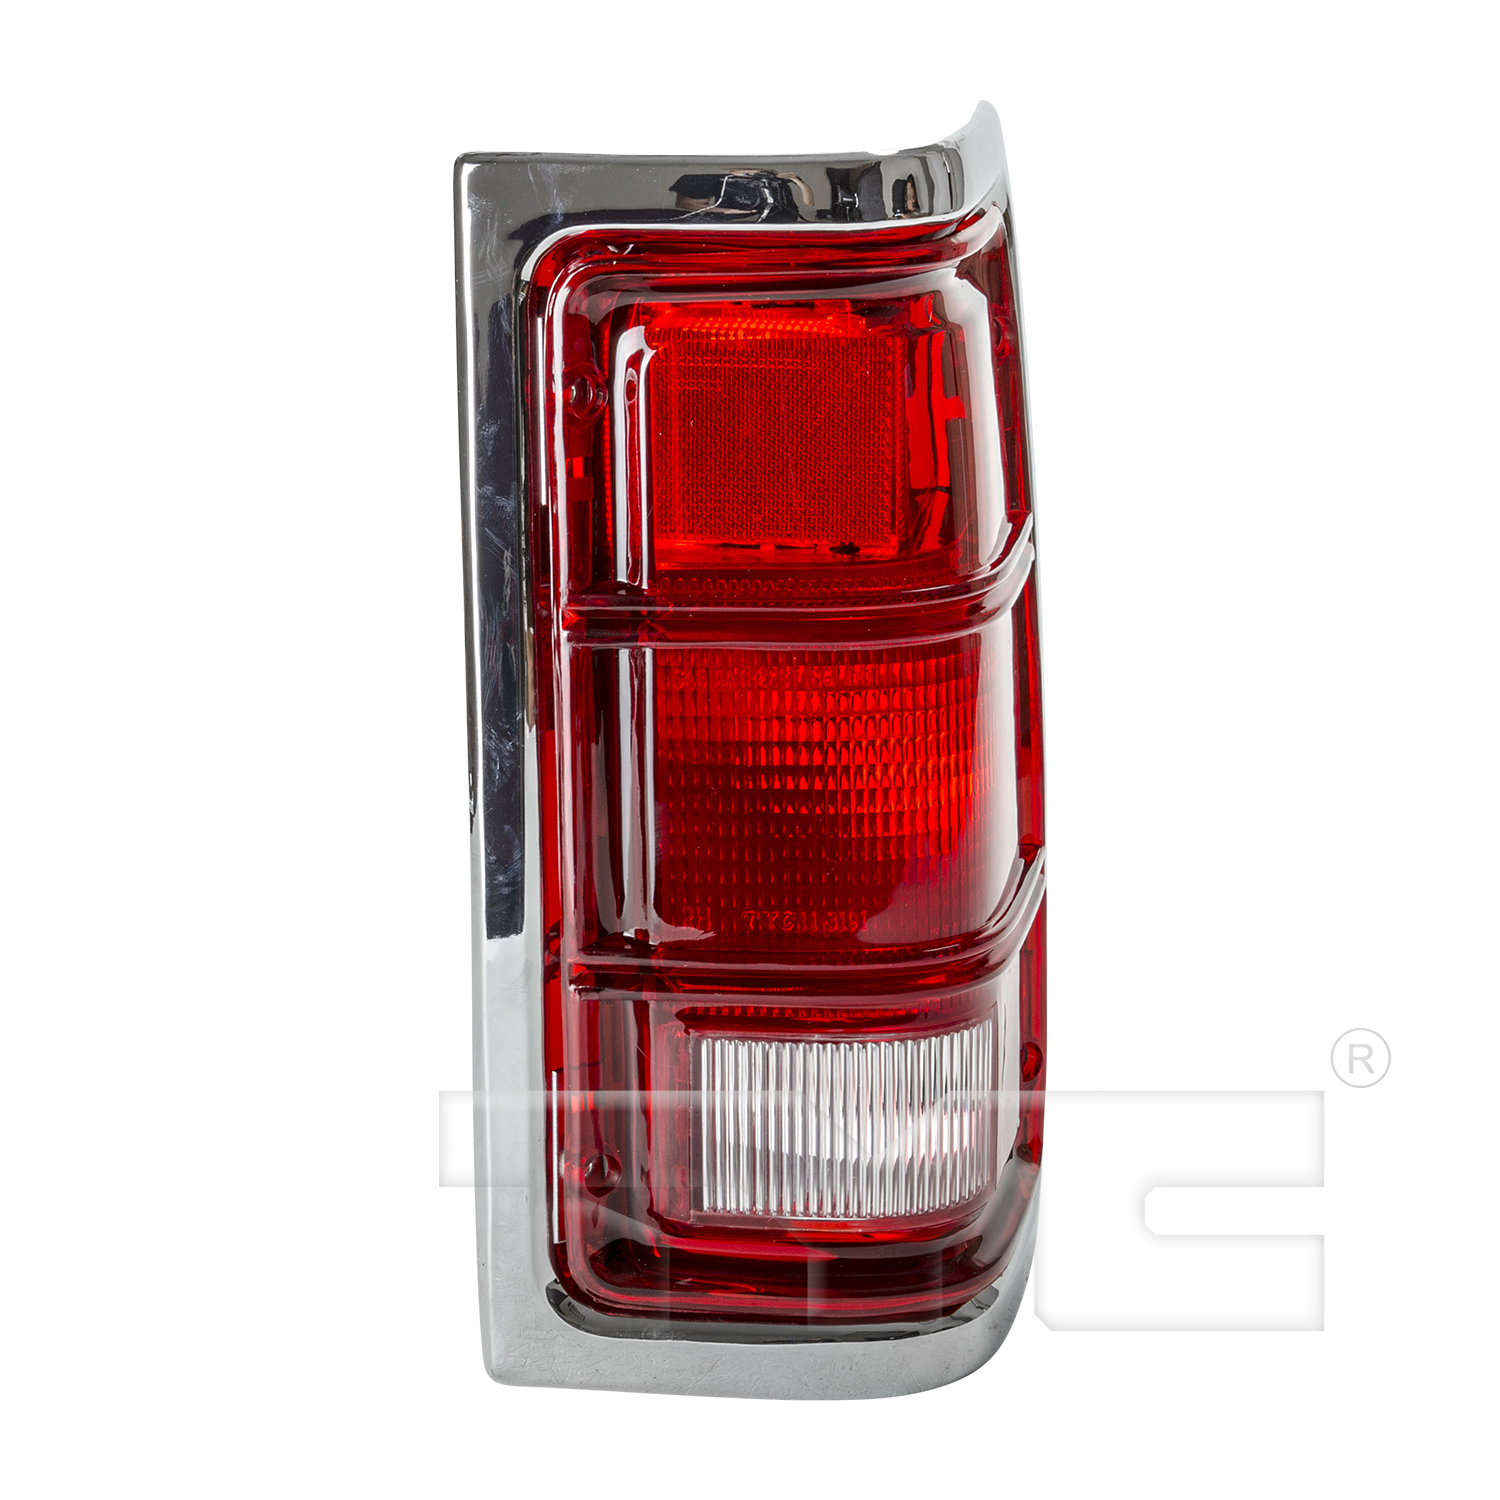 Aftermarket TAILLIGHTS for DODGE - W250, W250,87-91,RT Taillamp lens